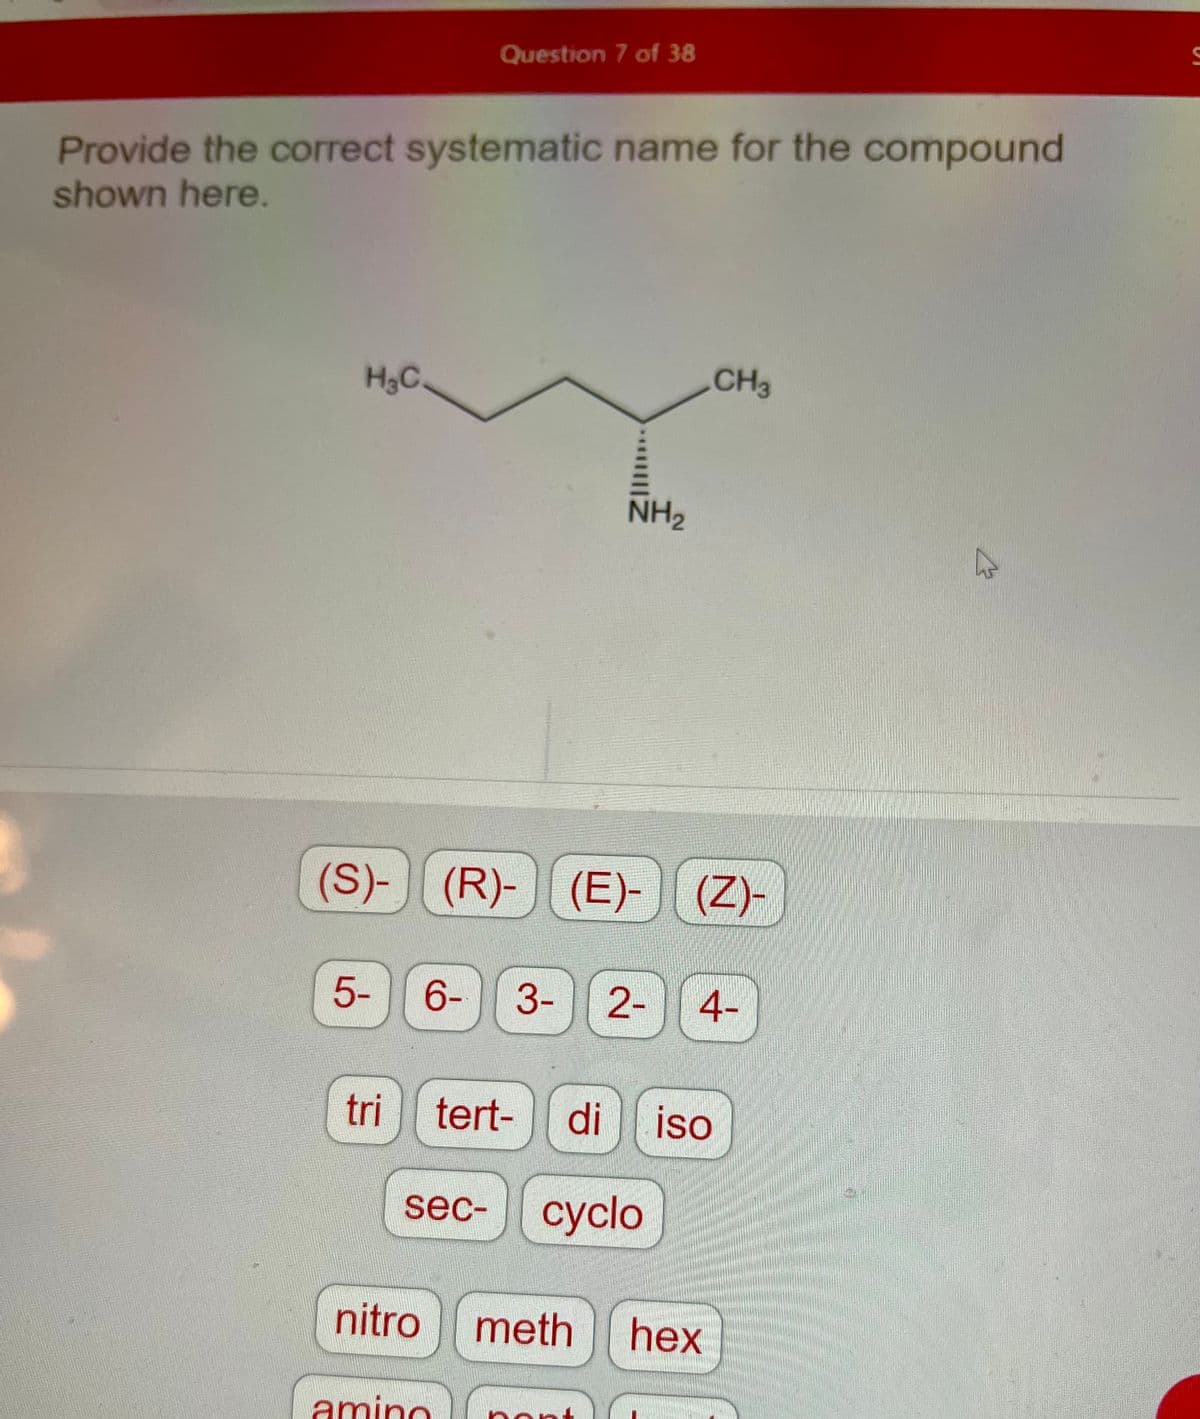 Provide the correct systematic name for the compound
shown here.
H₂C.
5-
tri
Question 7 of 38
(S)- (R)- (E)- (Z)-
||
nitro
NH₂
6- 3- 2- 4-
amino
sec- cyclo
tert- di iso
meth
CH3
hex
S